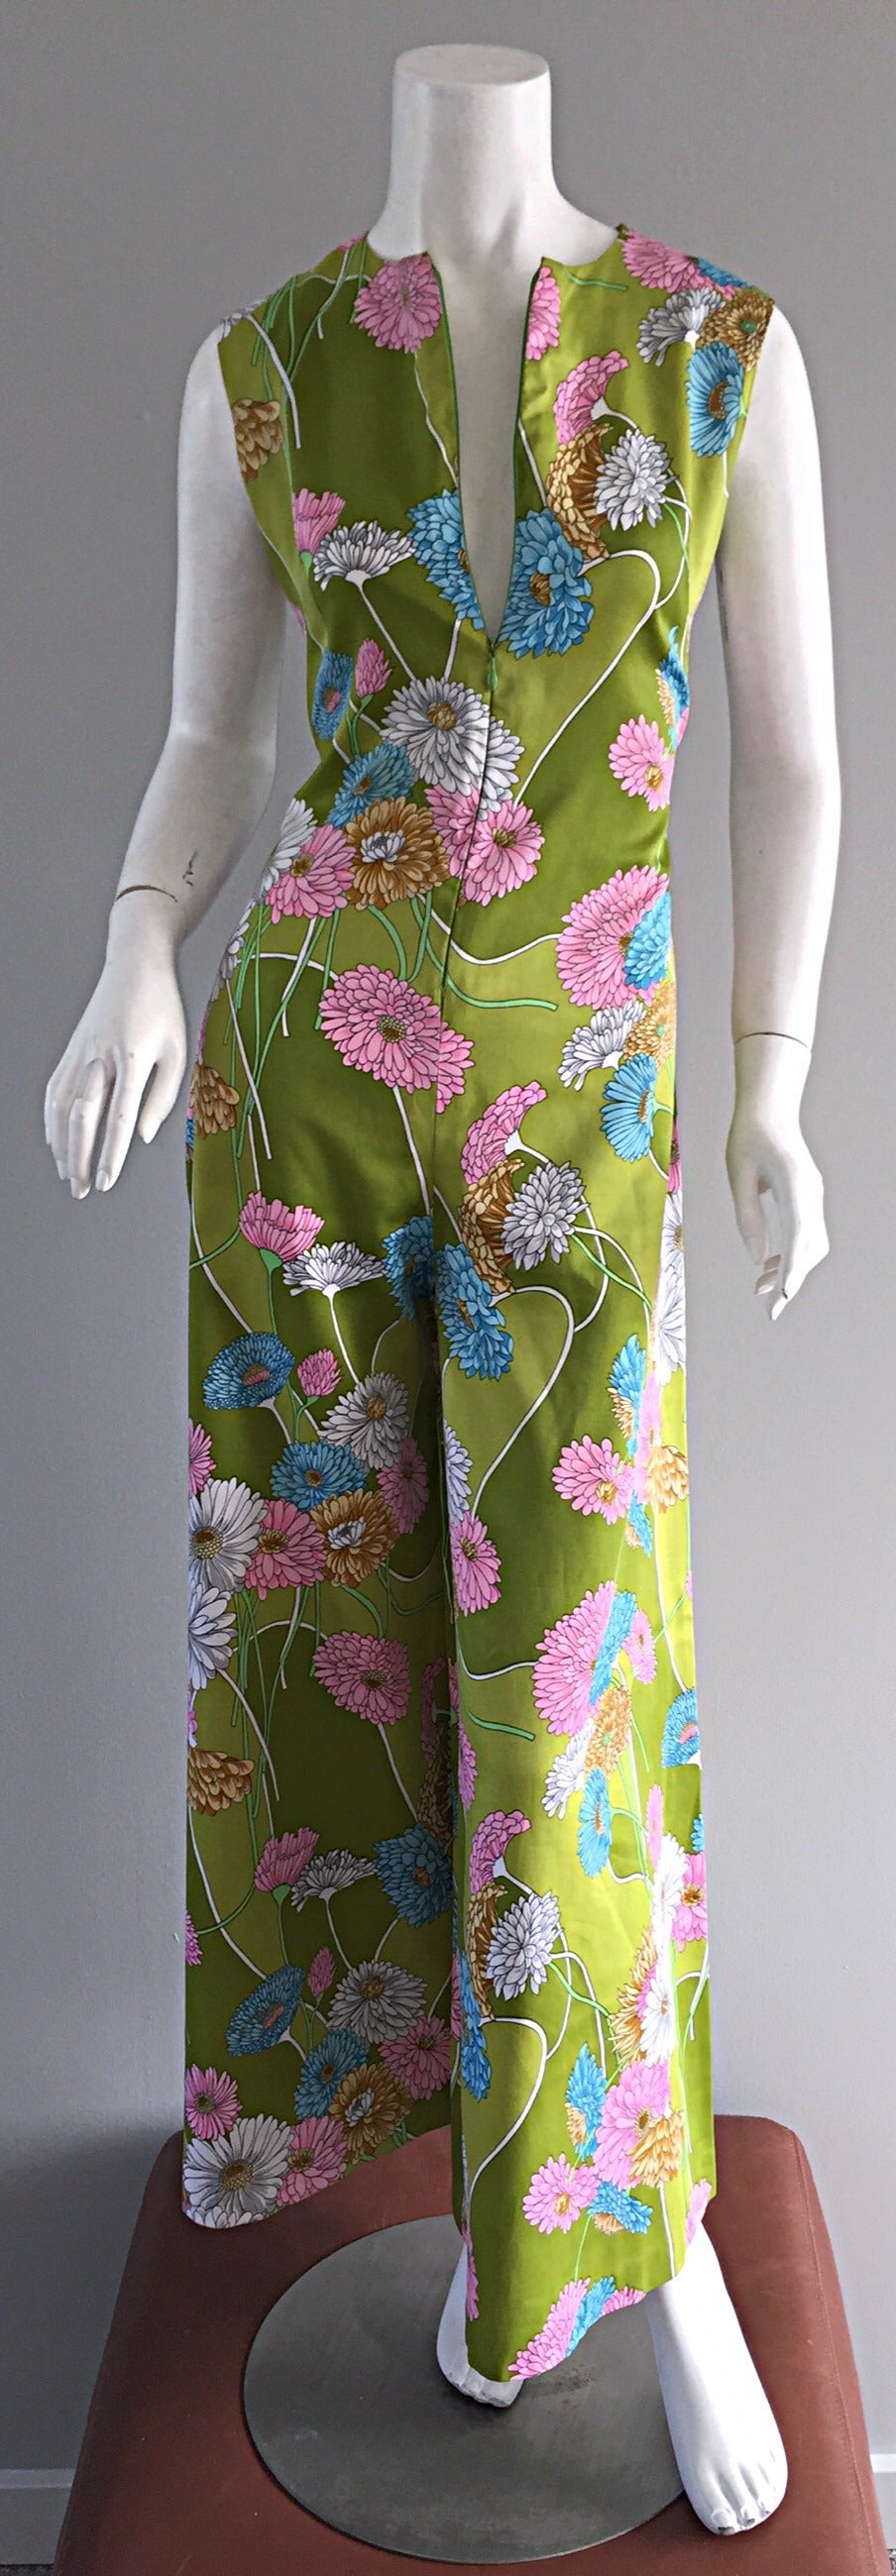 Late 1960s / Early 1970s 3 - D Culottes / Bell Bottom Vintage Daisy ...